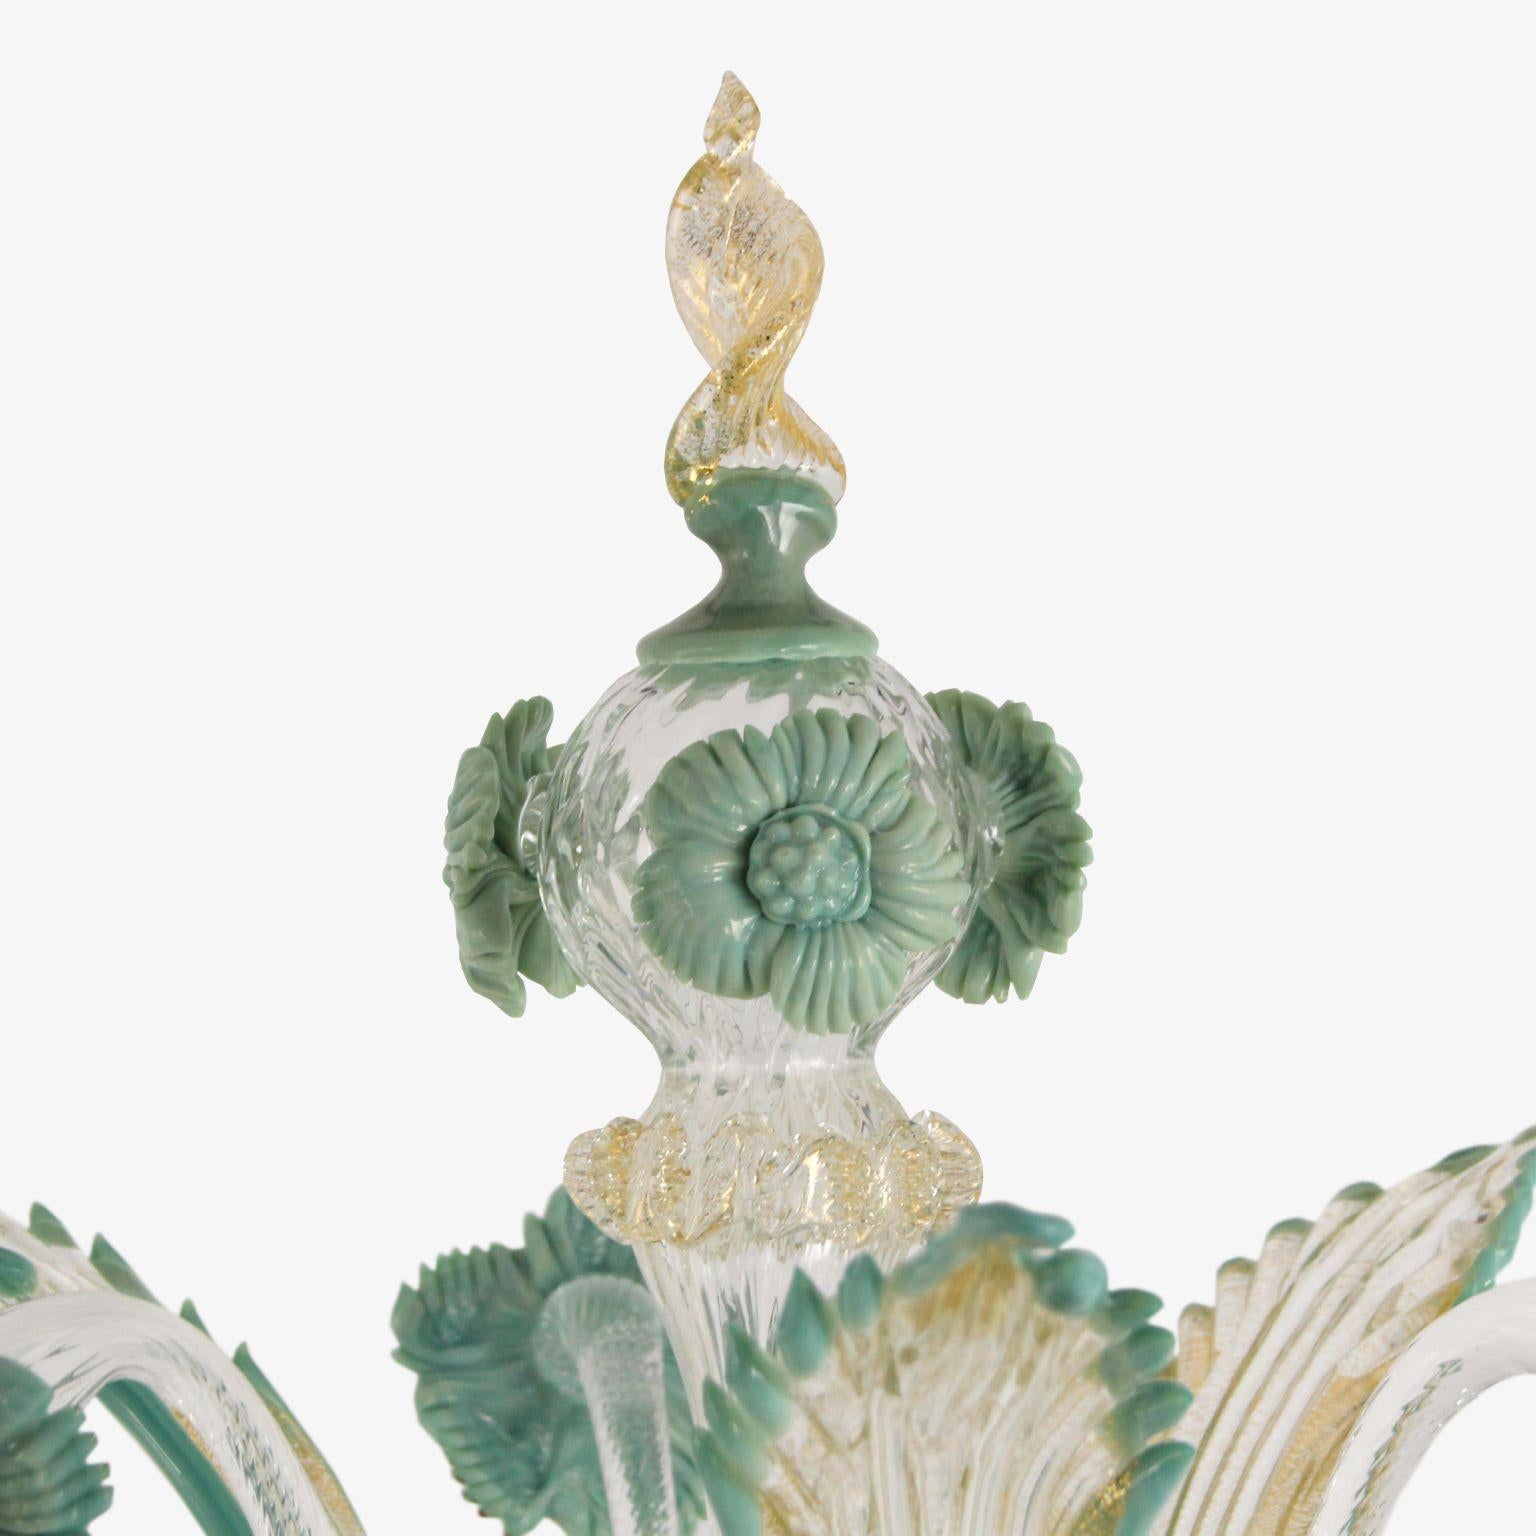 Luxury rezzonico flambeau 4 arms, crystal Murano glass, with gold, grey-green vitreous paste color details by Multiforme.
This artistic table lamp is an elegant and delicate lighting work, colored with pastel tones. The structure is a combination of